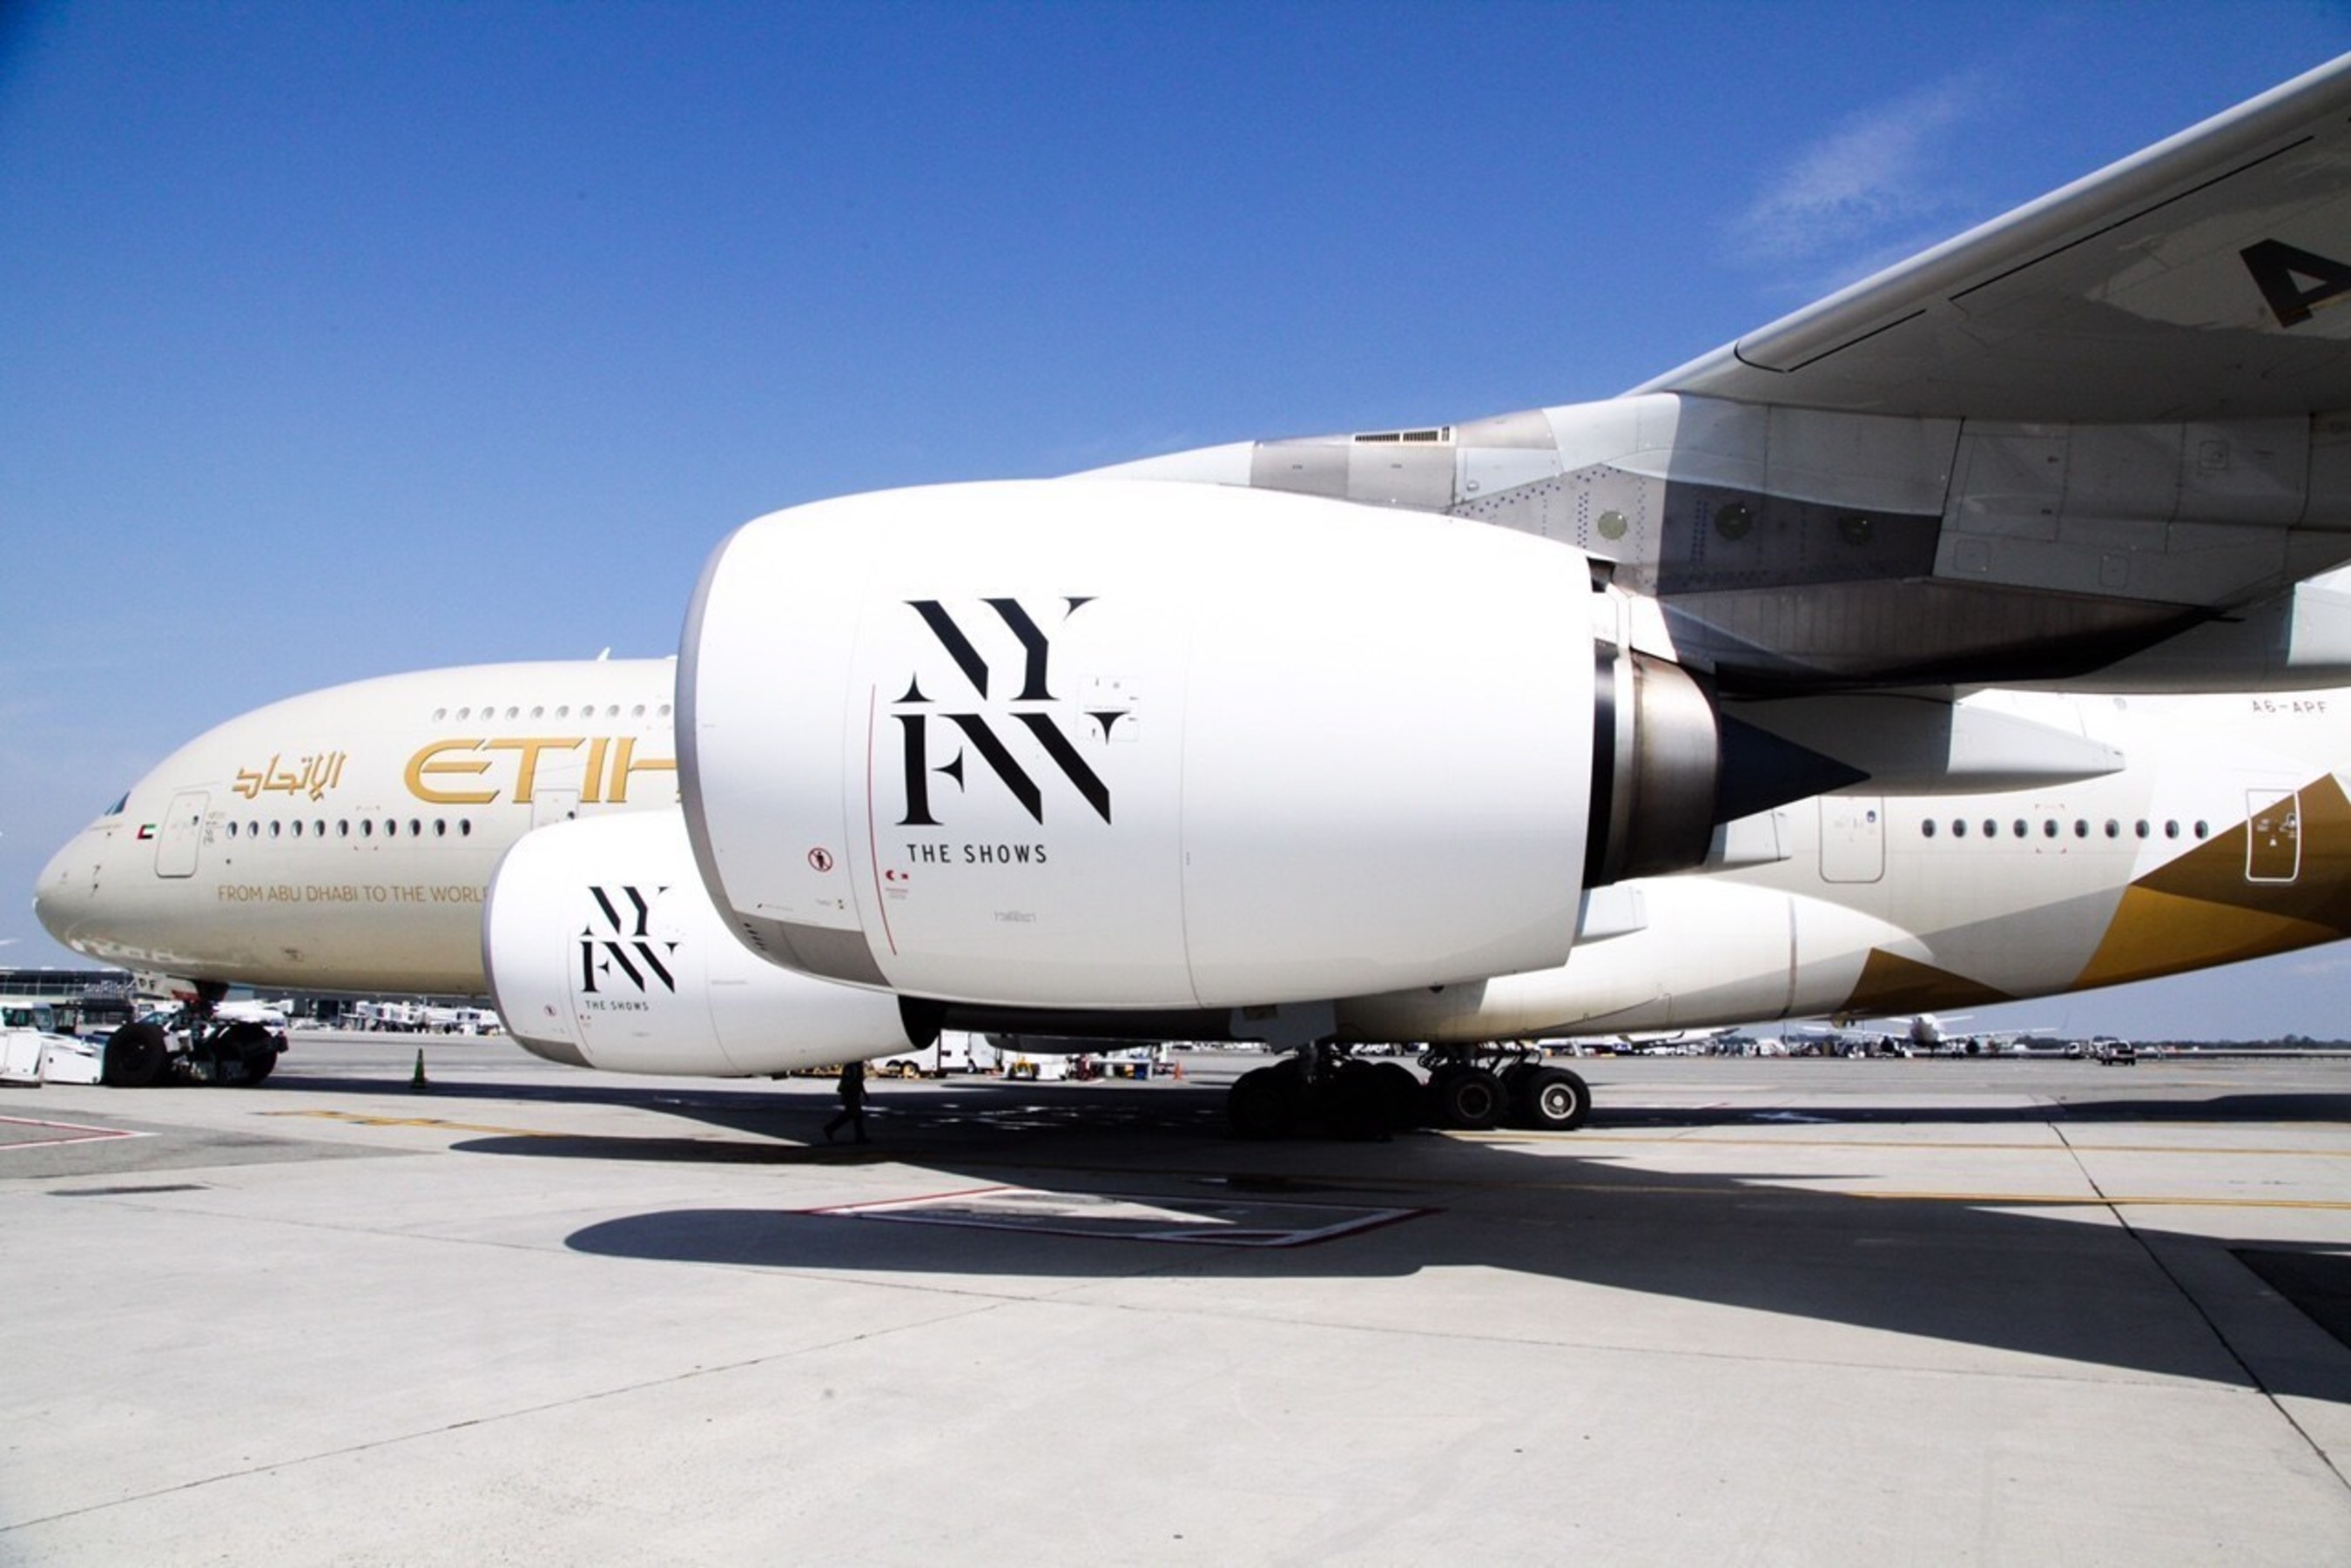 Etihad Airways "NYFW: The Shows"-branded A380 aircraft at JFK International Airport.